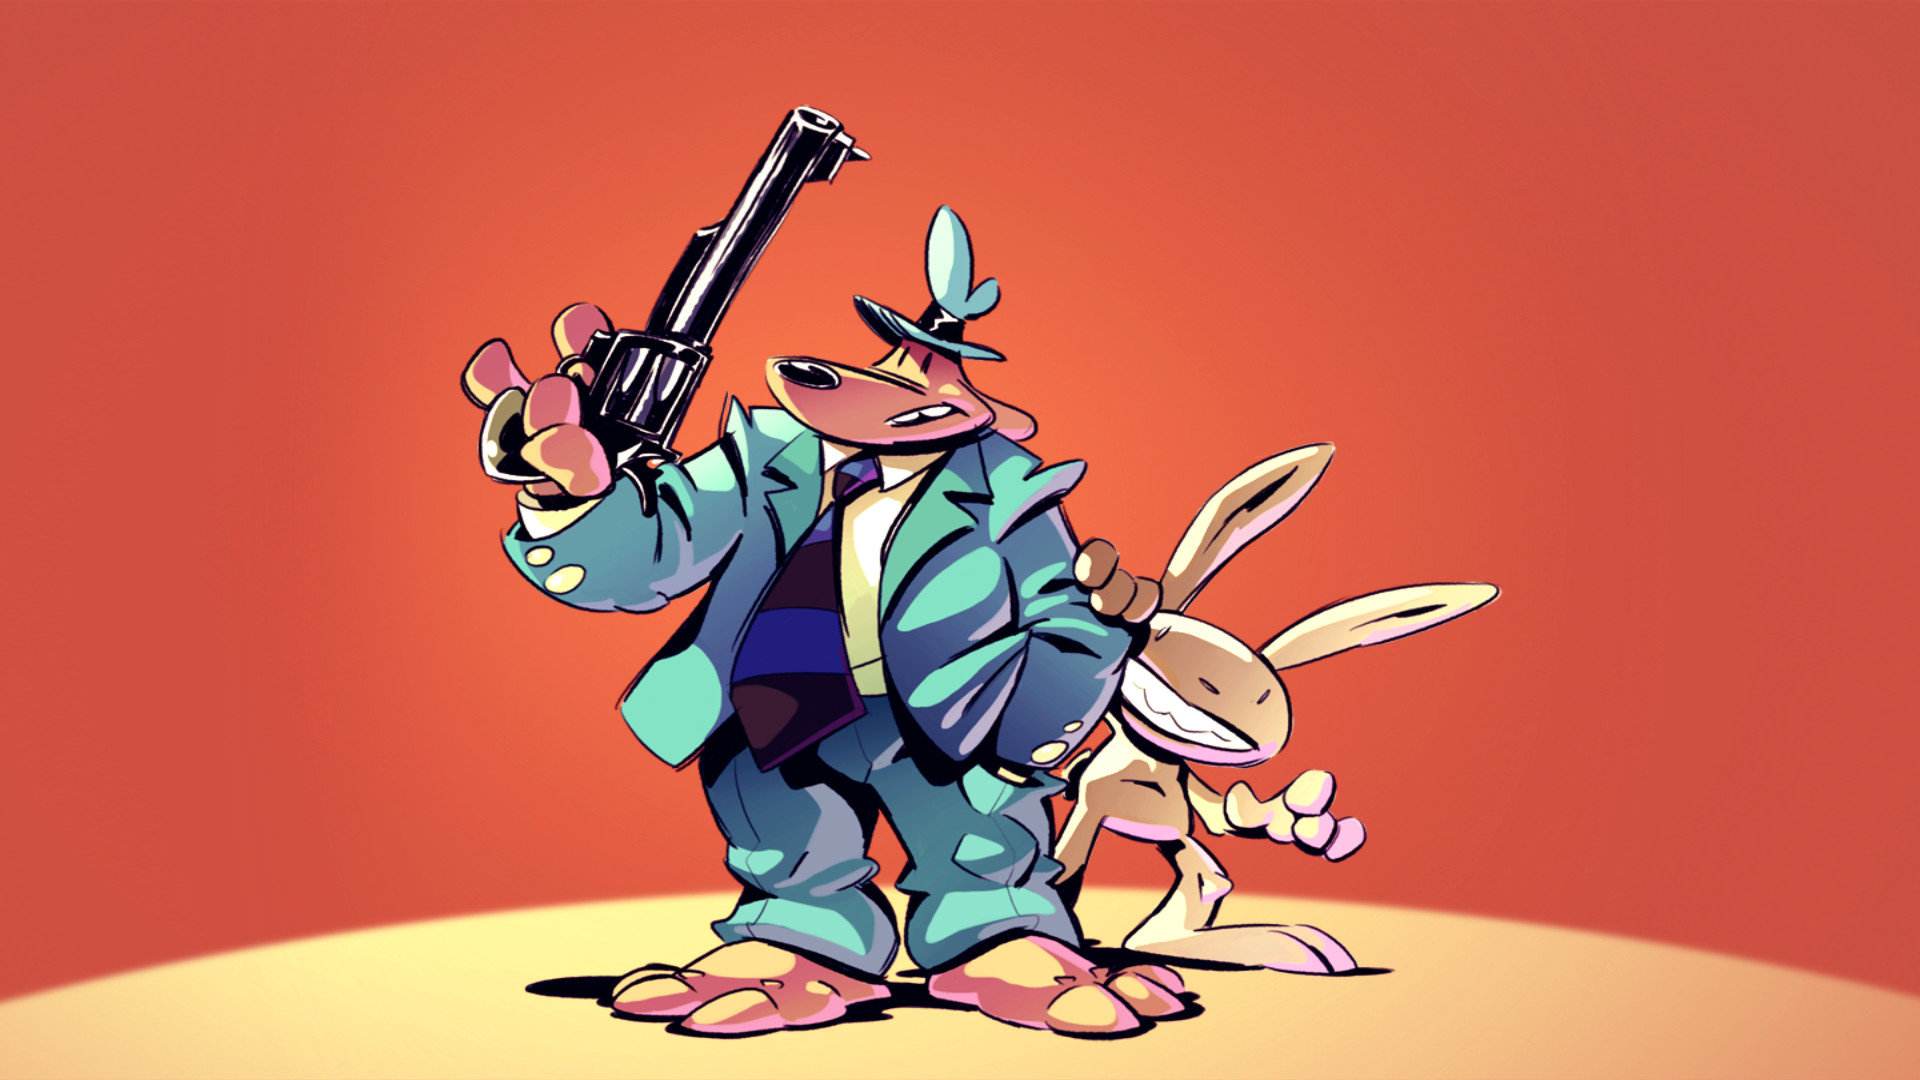 Sam & Max 203: Night of the Raving Dead